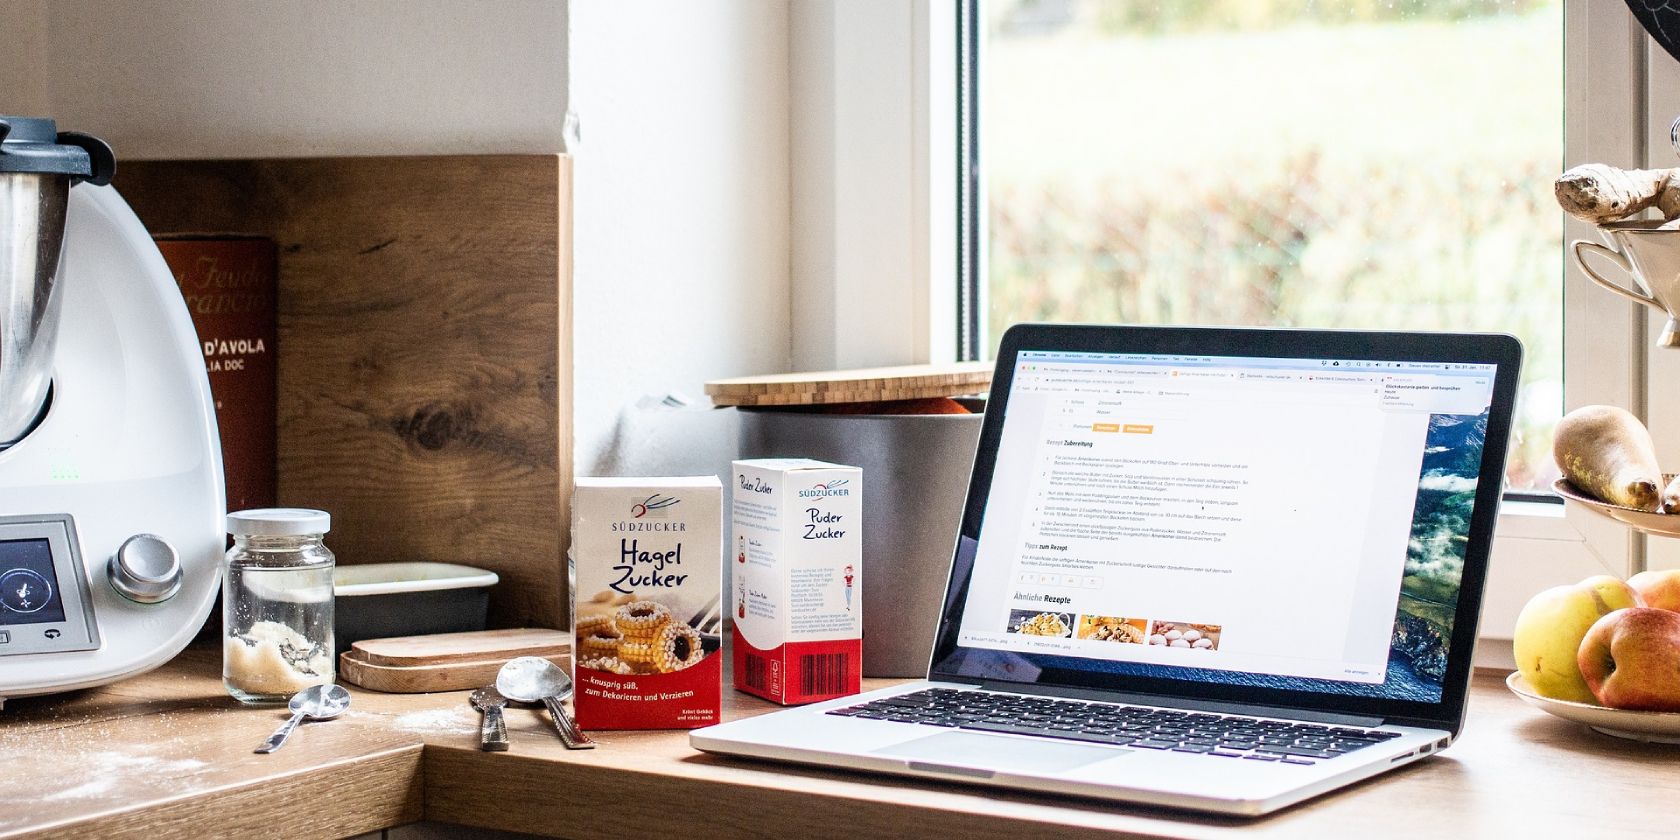 A laptop with a recipe on it that is placed on a kitchen countertop